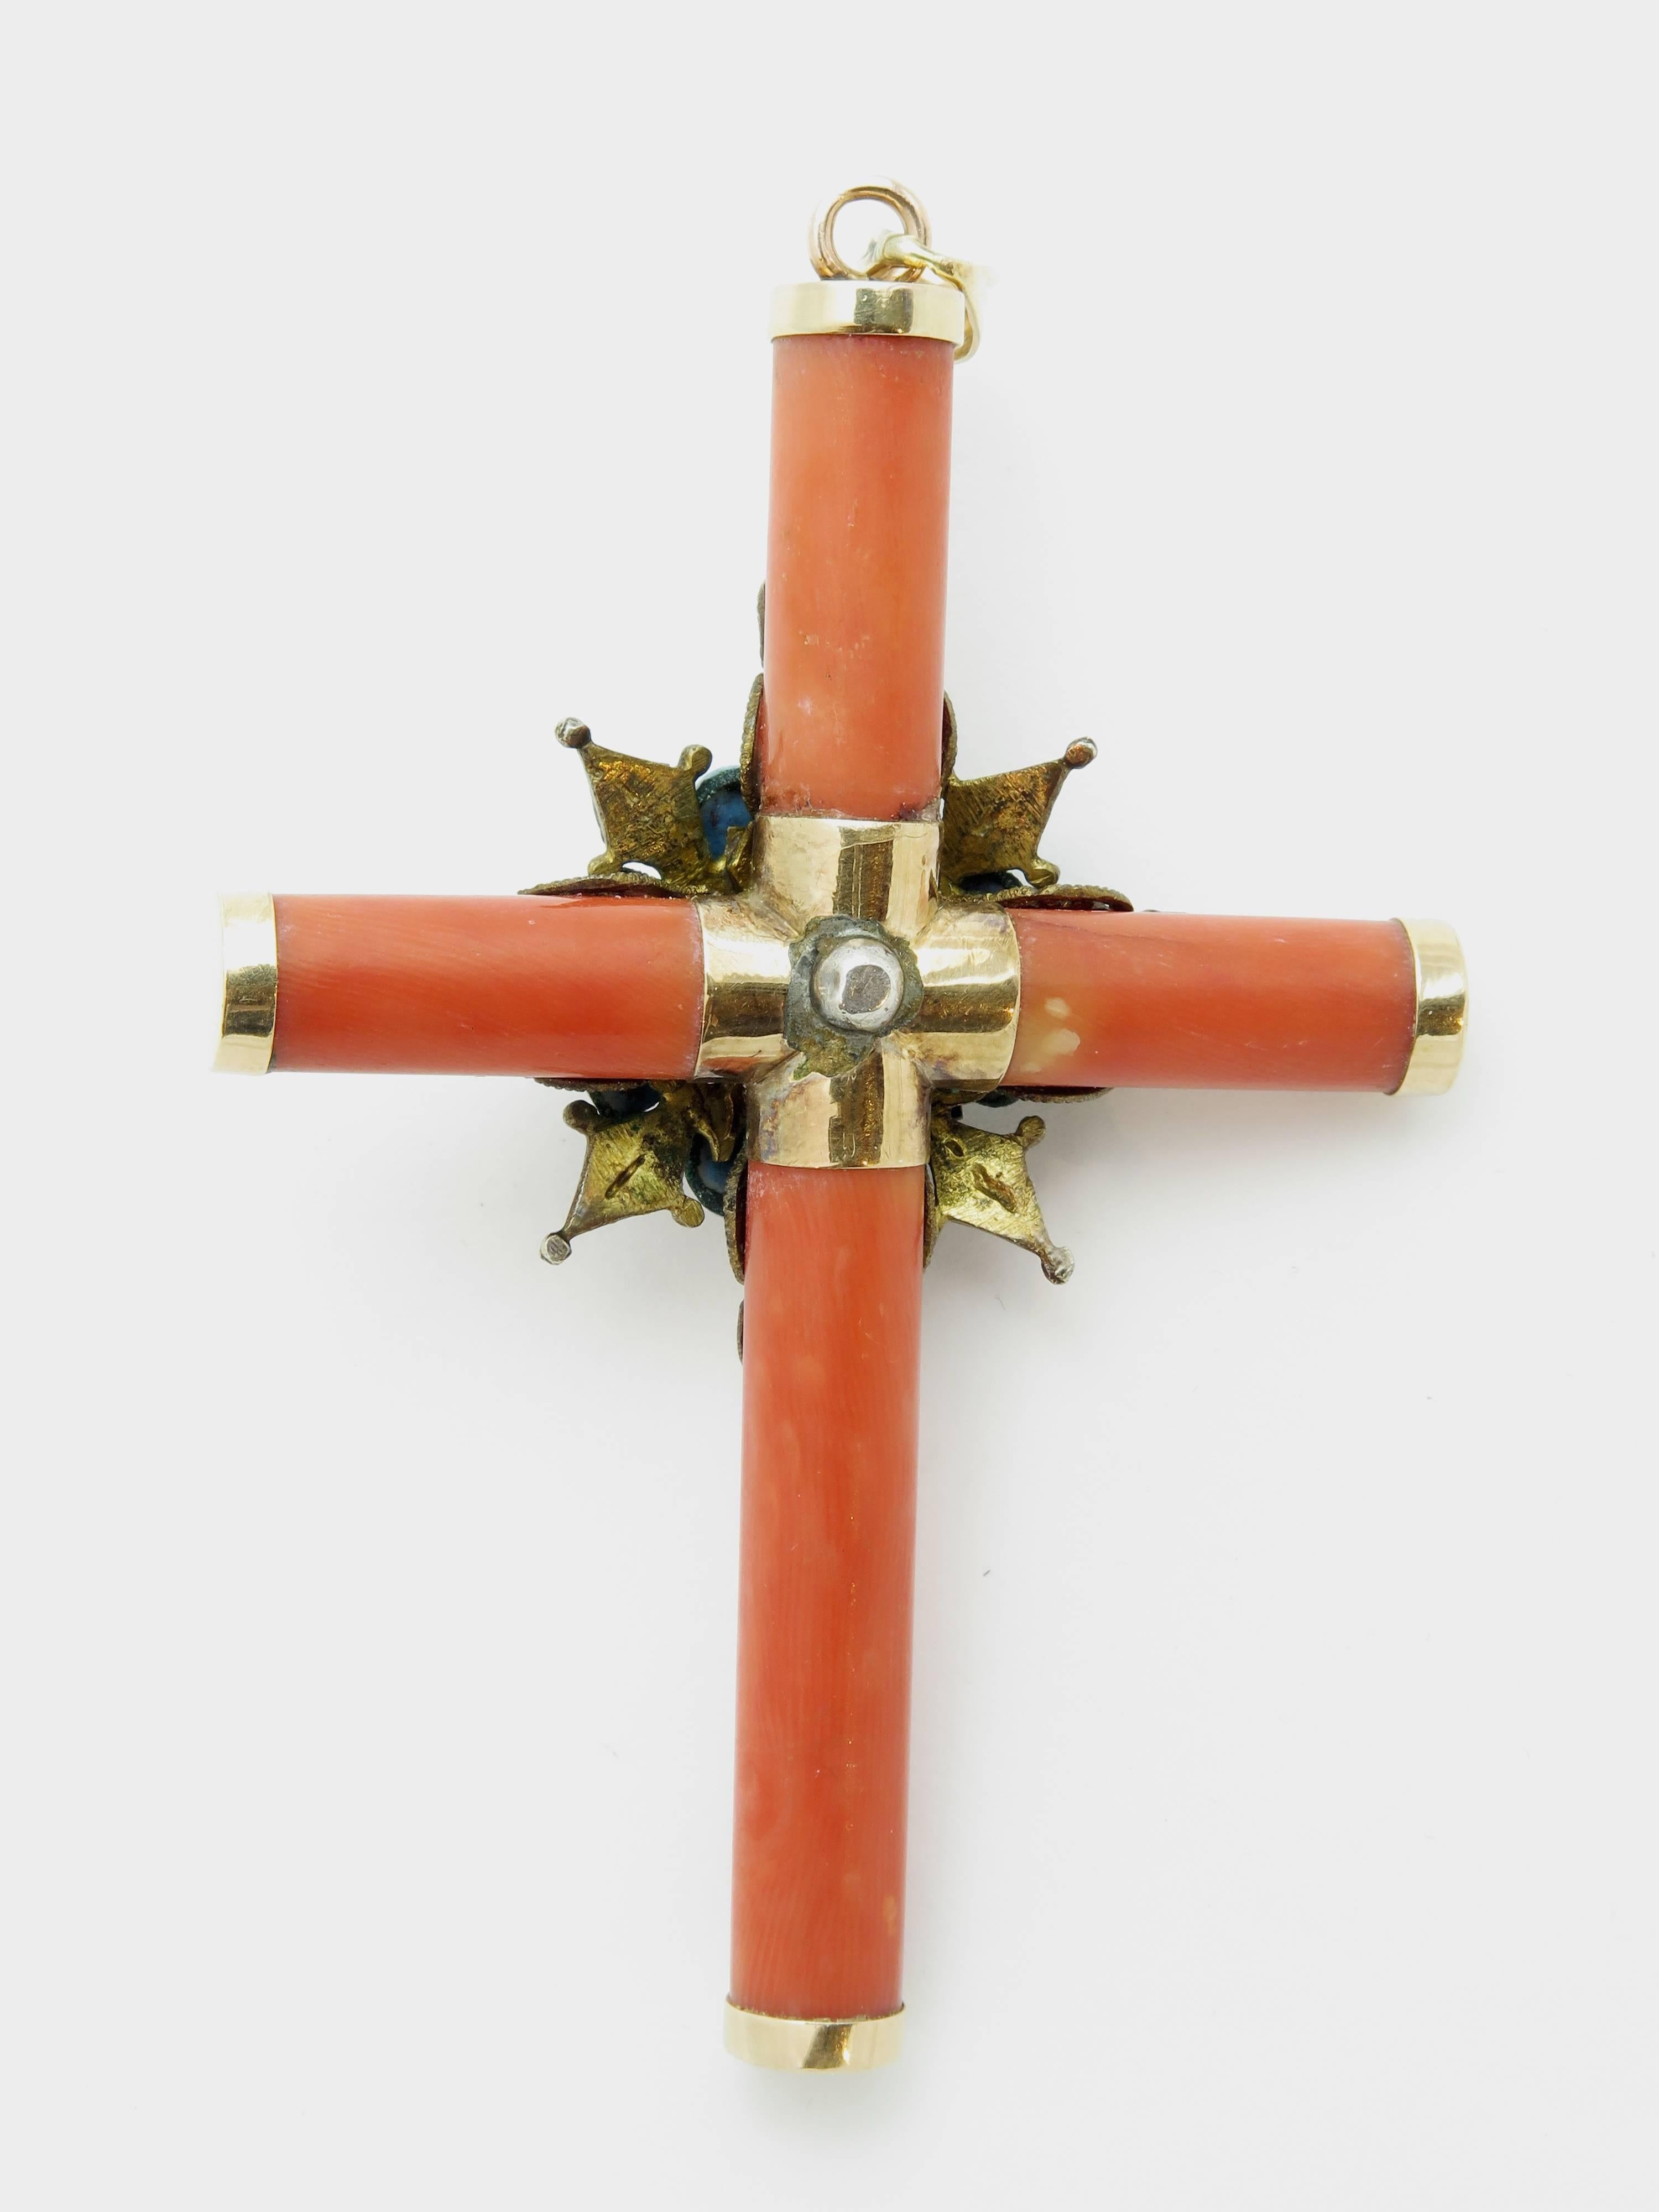 A stunning coral cross formed by tubular reddish-organge pieces of coral, capped with 14k gold mounts. Overlaid with an intricate silver filigree rosette embellished with turquoise, rubies and pearls.